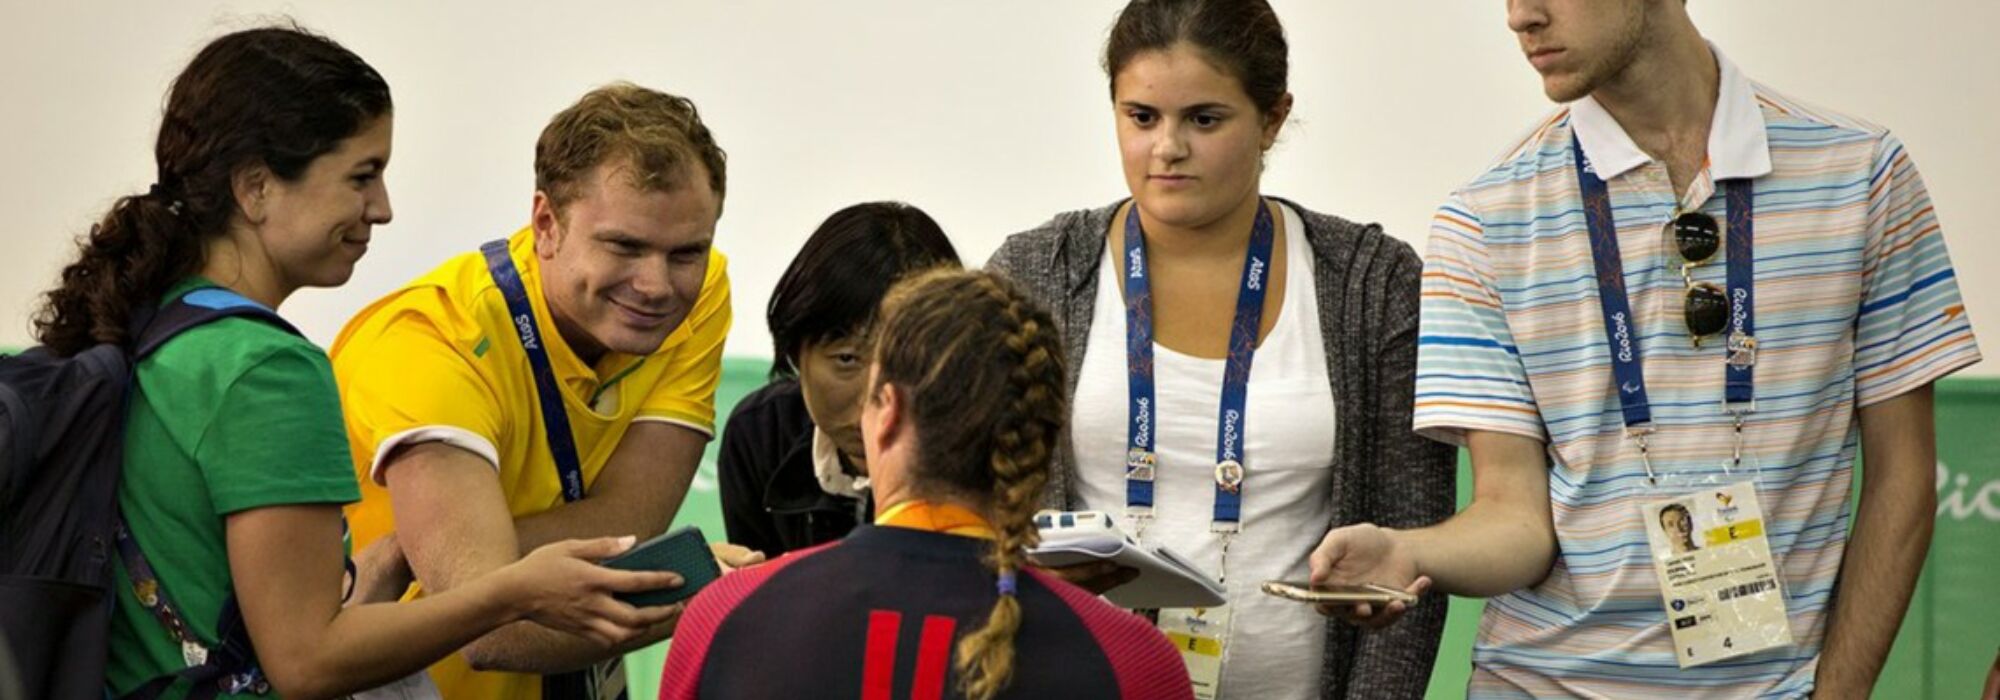 Five Penn State sports journalism students with press credential badges and recording audio on their mobile phones stand interviewing a paralympic athlete during the 2016 Paralympics